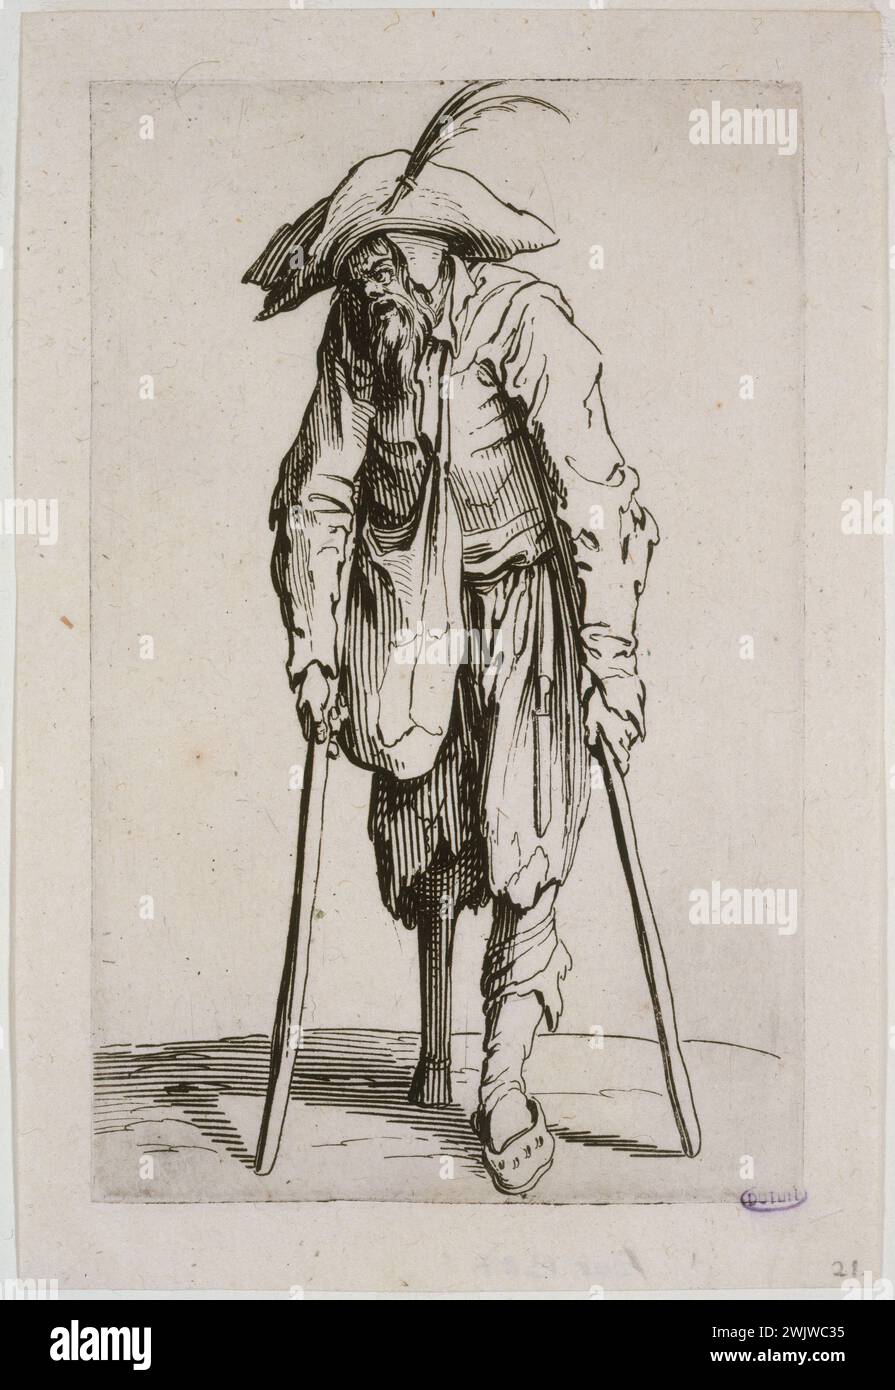 Jacques Callot (1592-1635). 'The beggars, the beggar with a wooden leg, 1st state'. Etching. Museum of Fine Arts of the City of Paris, Petit Palais. 27019-14 Bequille, tramp, man, infirm, nursing, wooden leg, beggar, poverty, homeless, homeless, hat Stock Photo